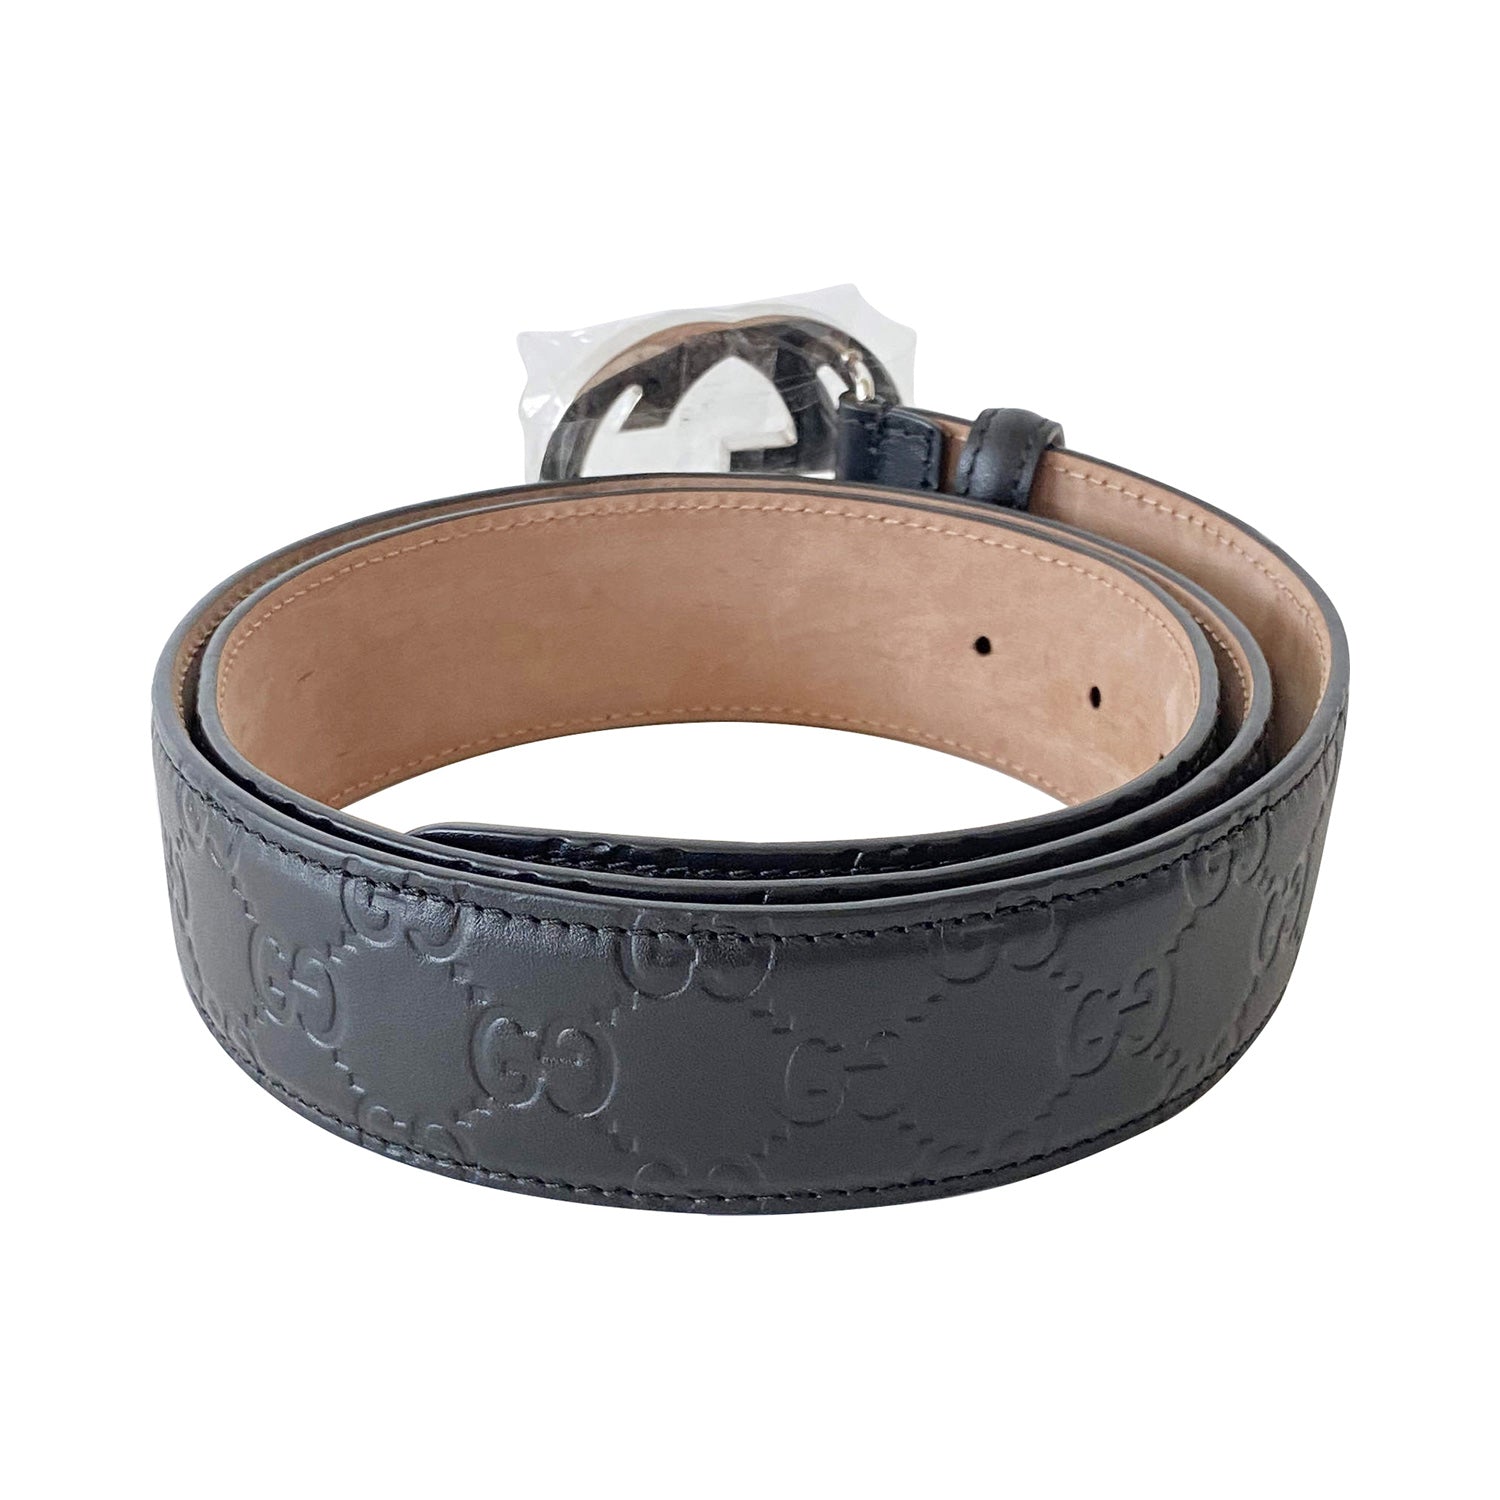 Shop authentic Gucci GG Interlocking Leather Belt at revogue for just ...